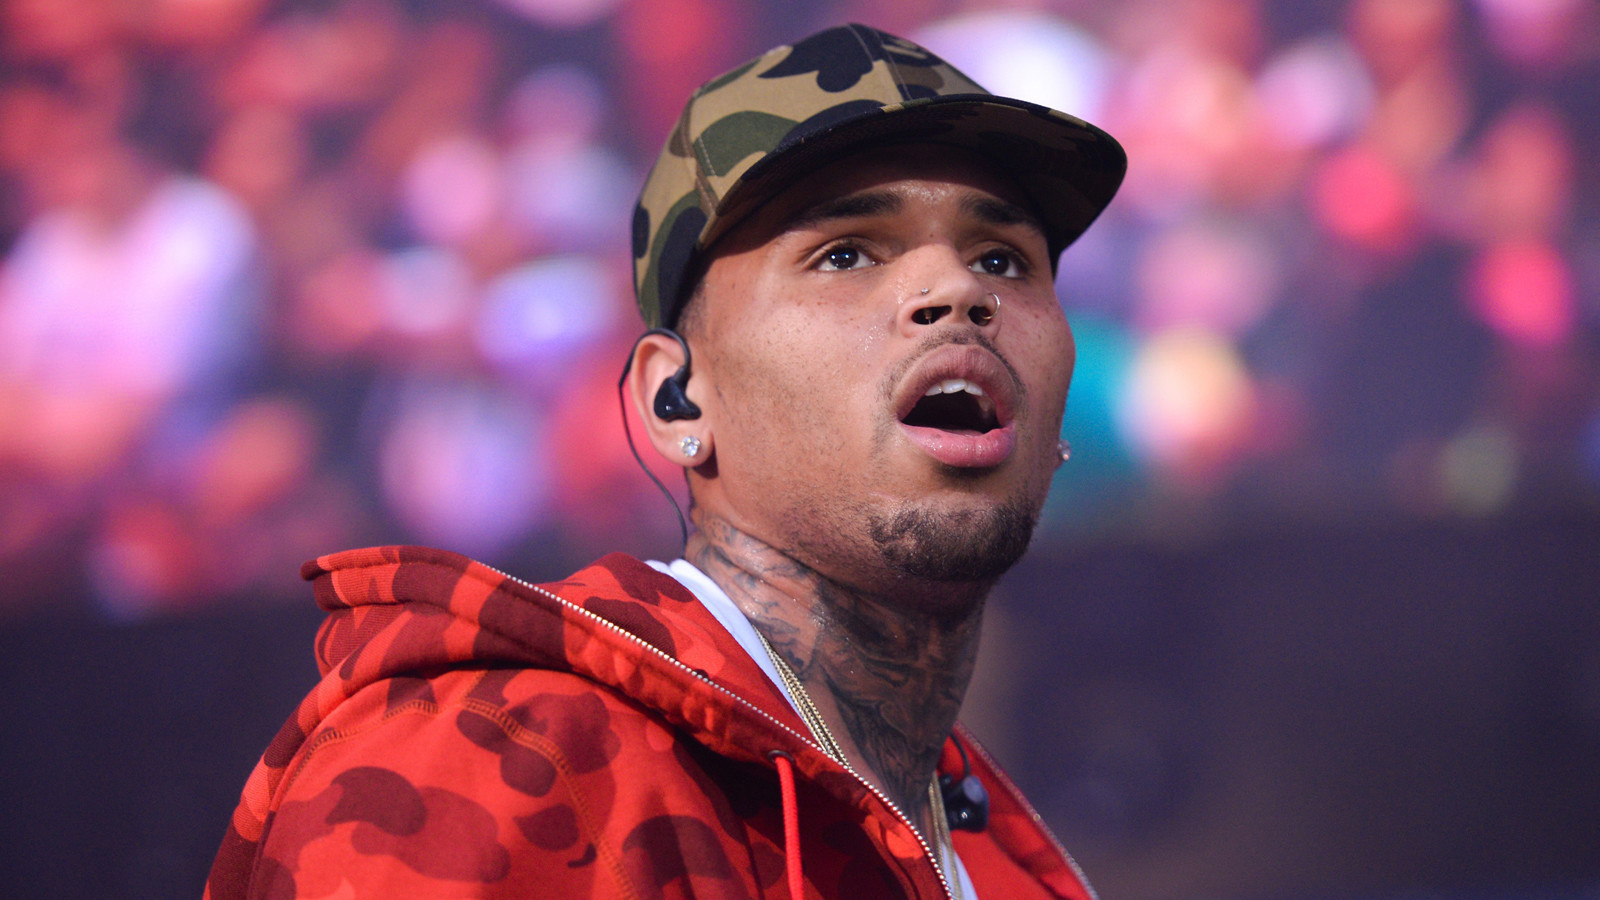 How much trouble is Chris Brown in? His past legal woes, Rihanna assault could haunt ...